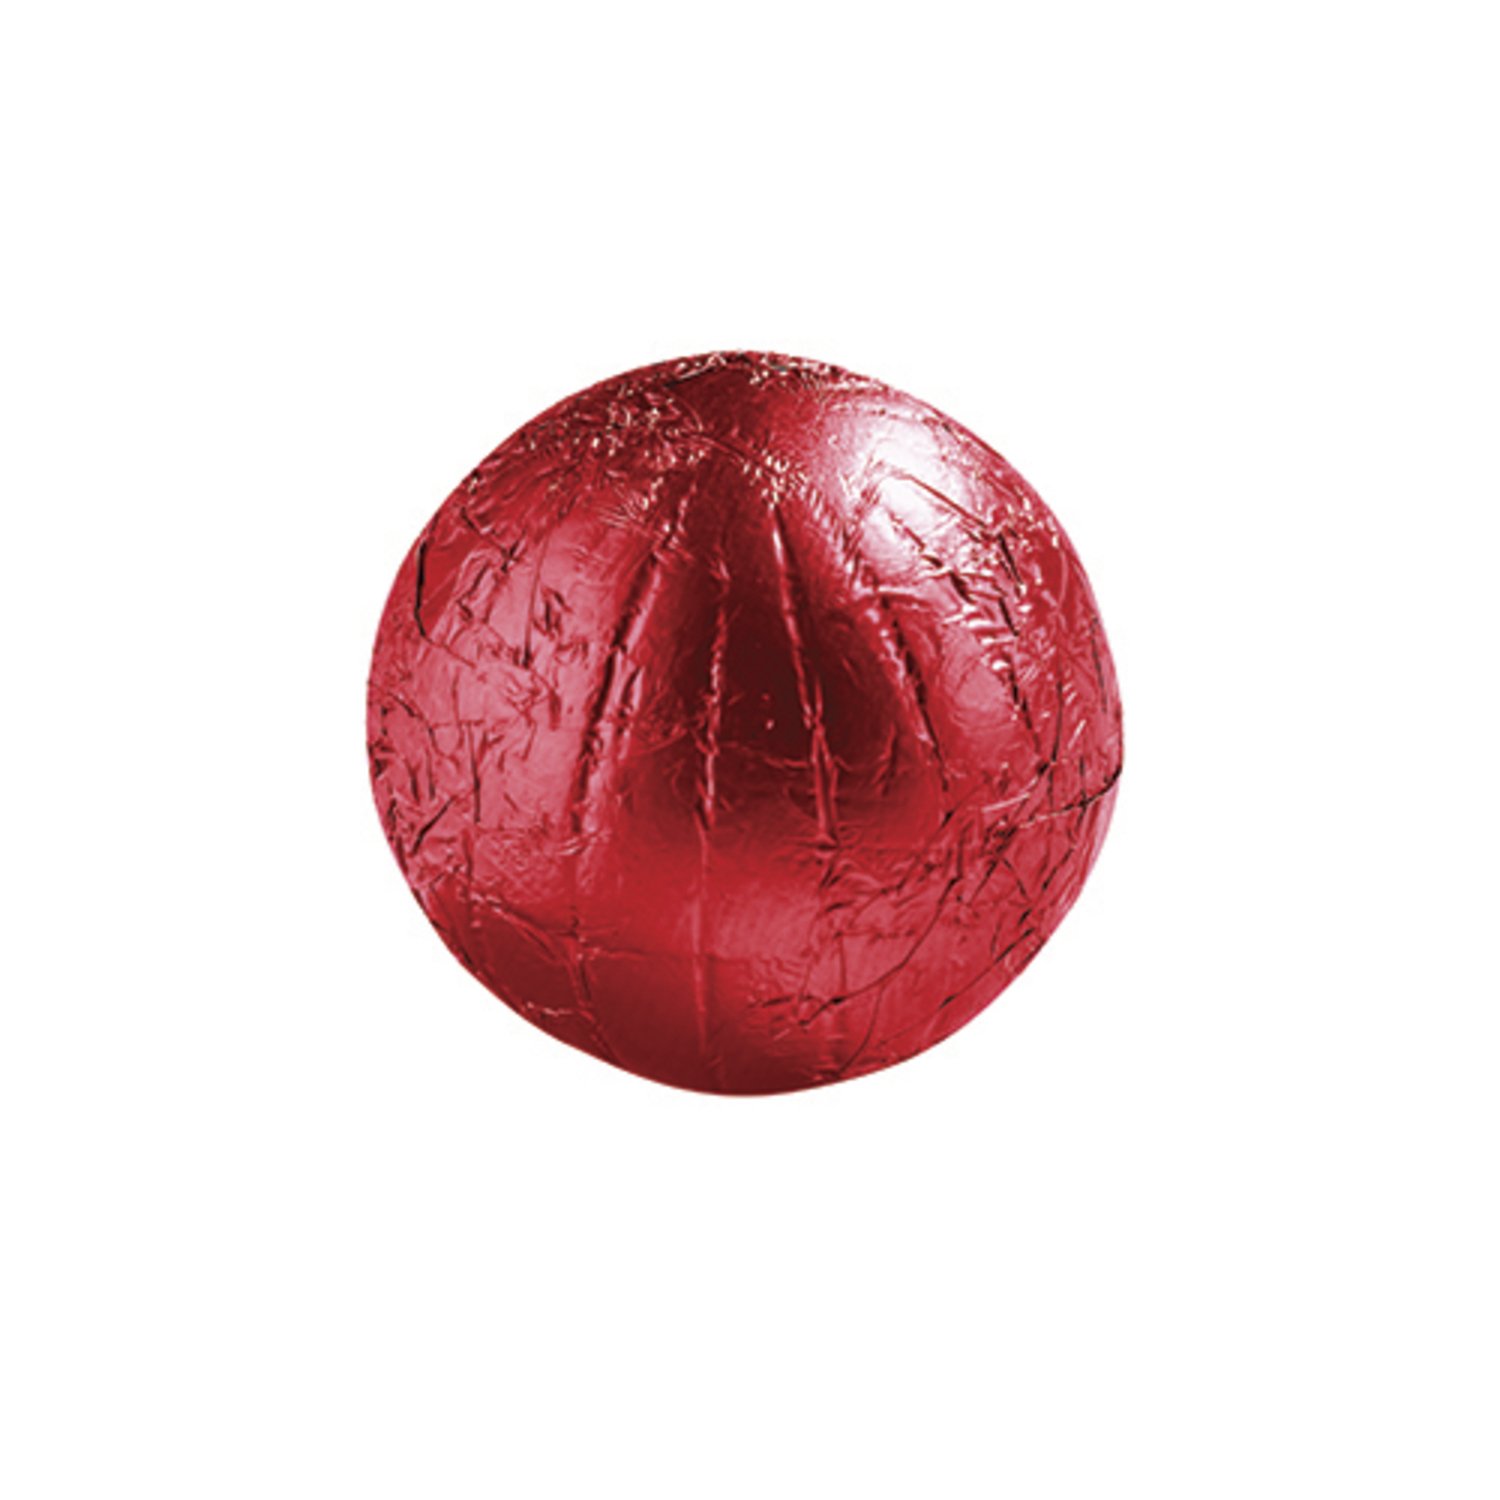 Rudolf - red foiled milk sphere with brownie creme filling 10.5g - 2xkg